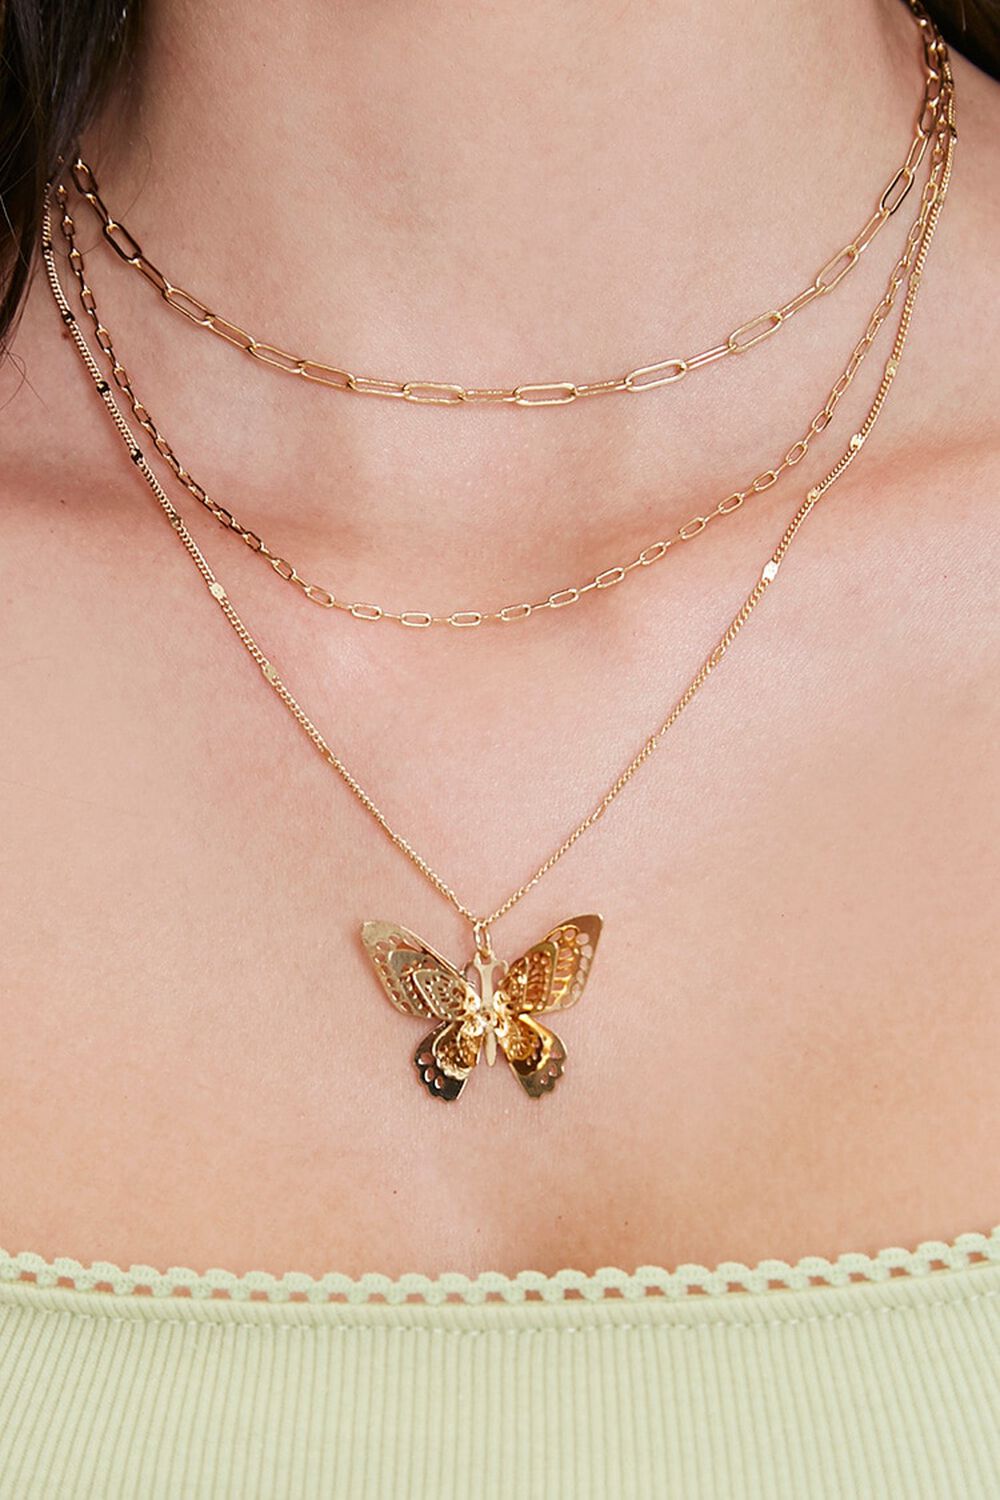 GOLD Butterfly Pendant Layered Necklace, image 1